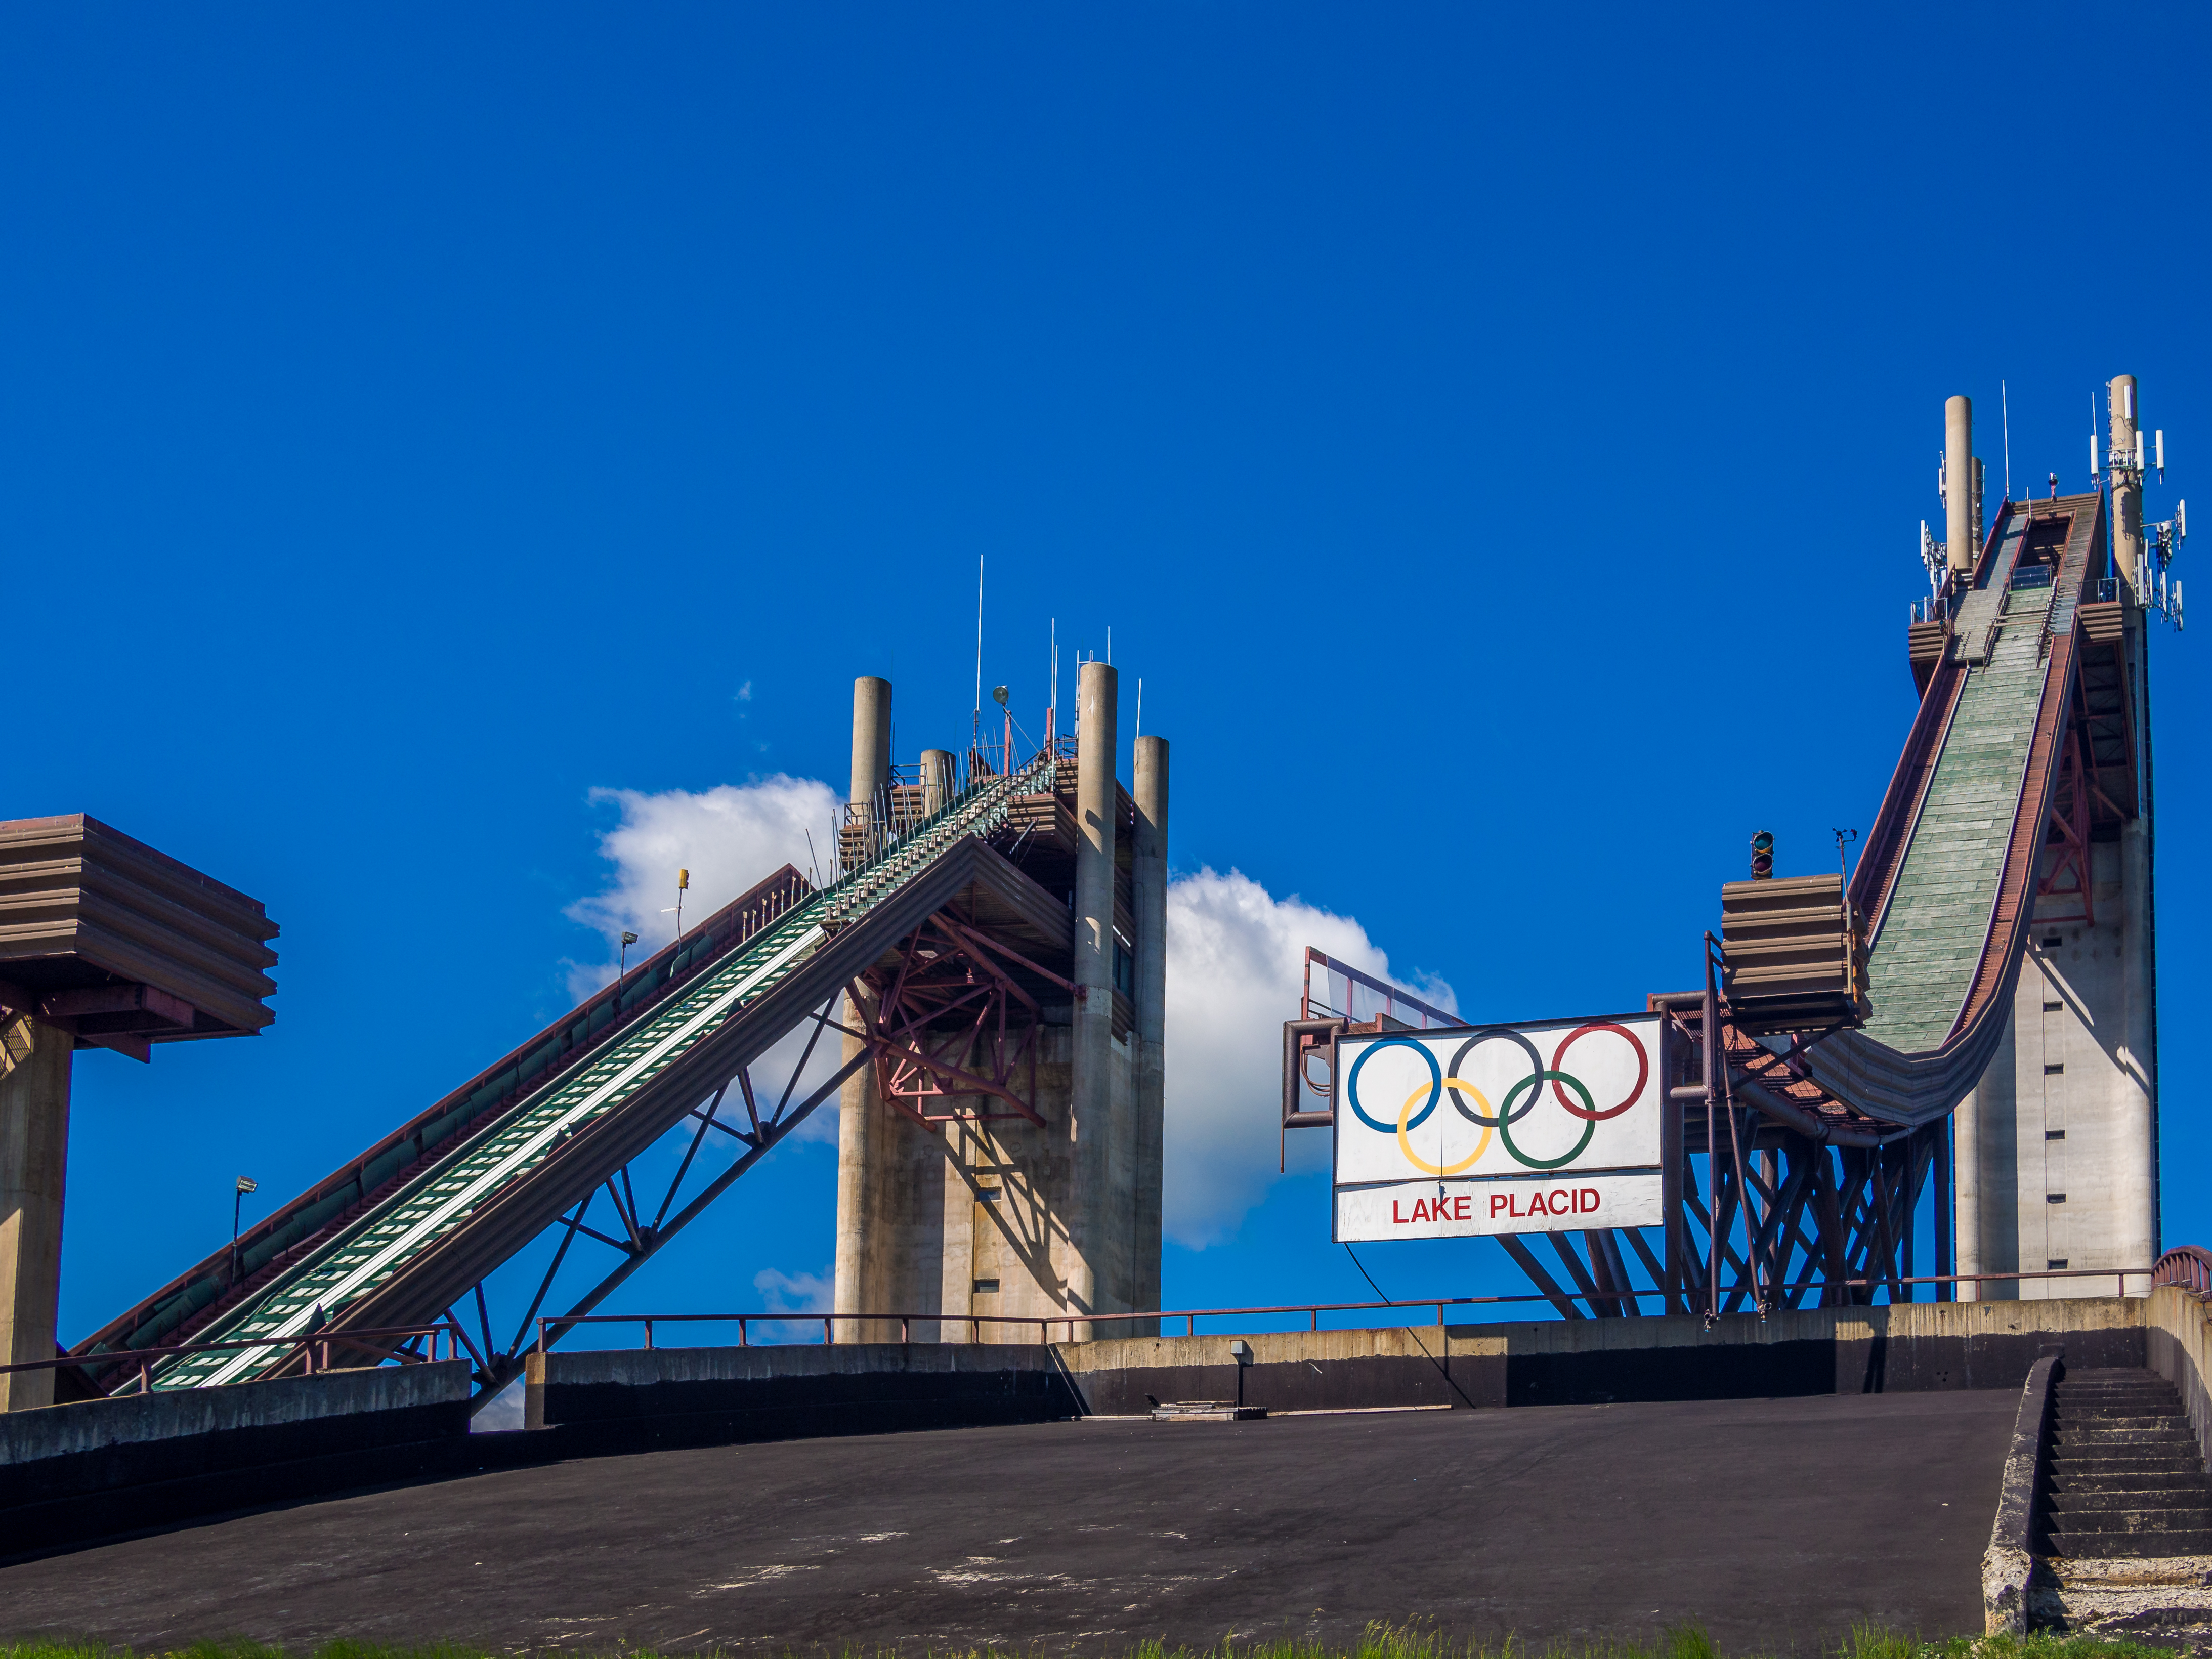 Best Small Towns in New York - Olympic Ski Jump Complex in Lake Placid NY